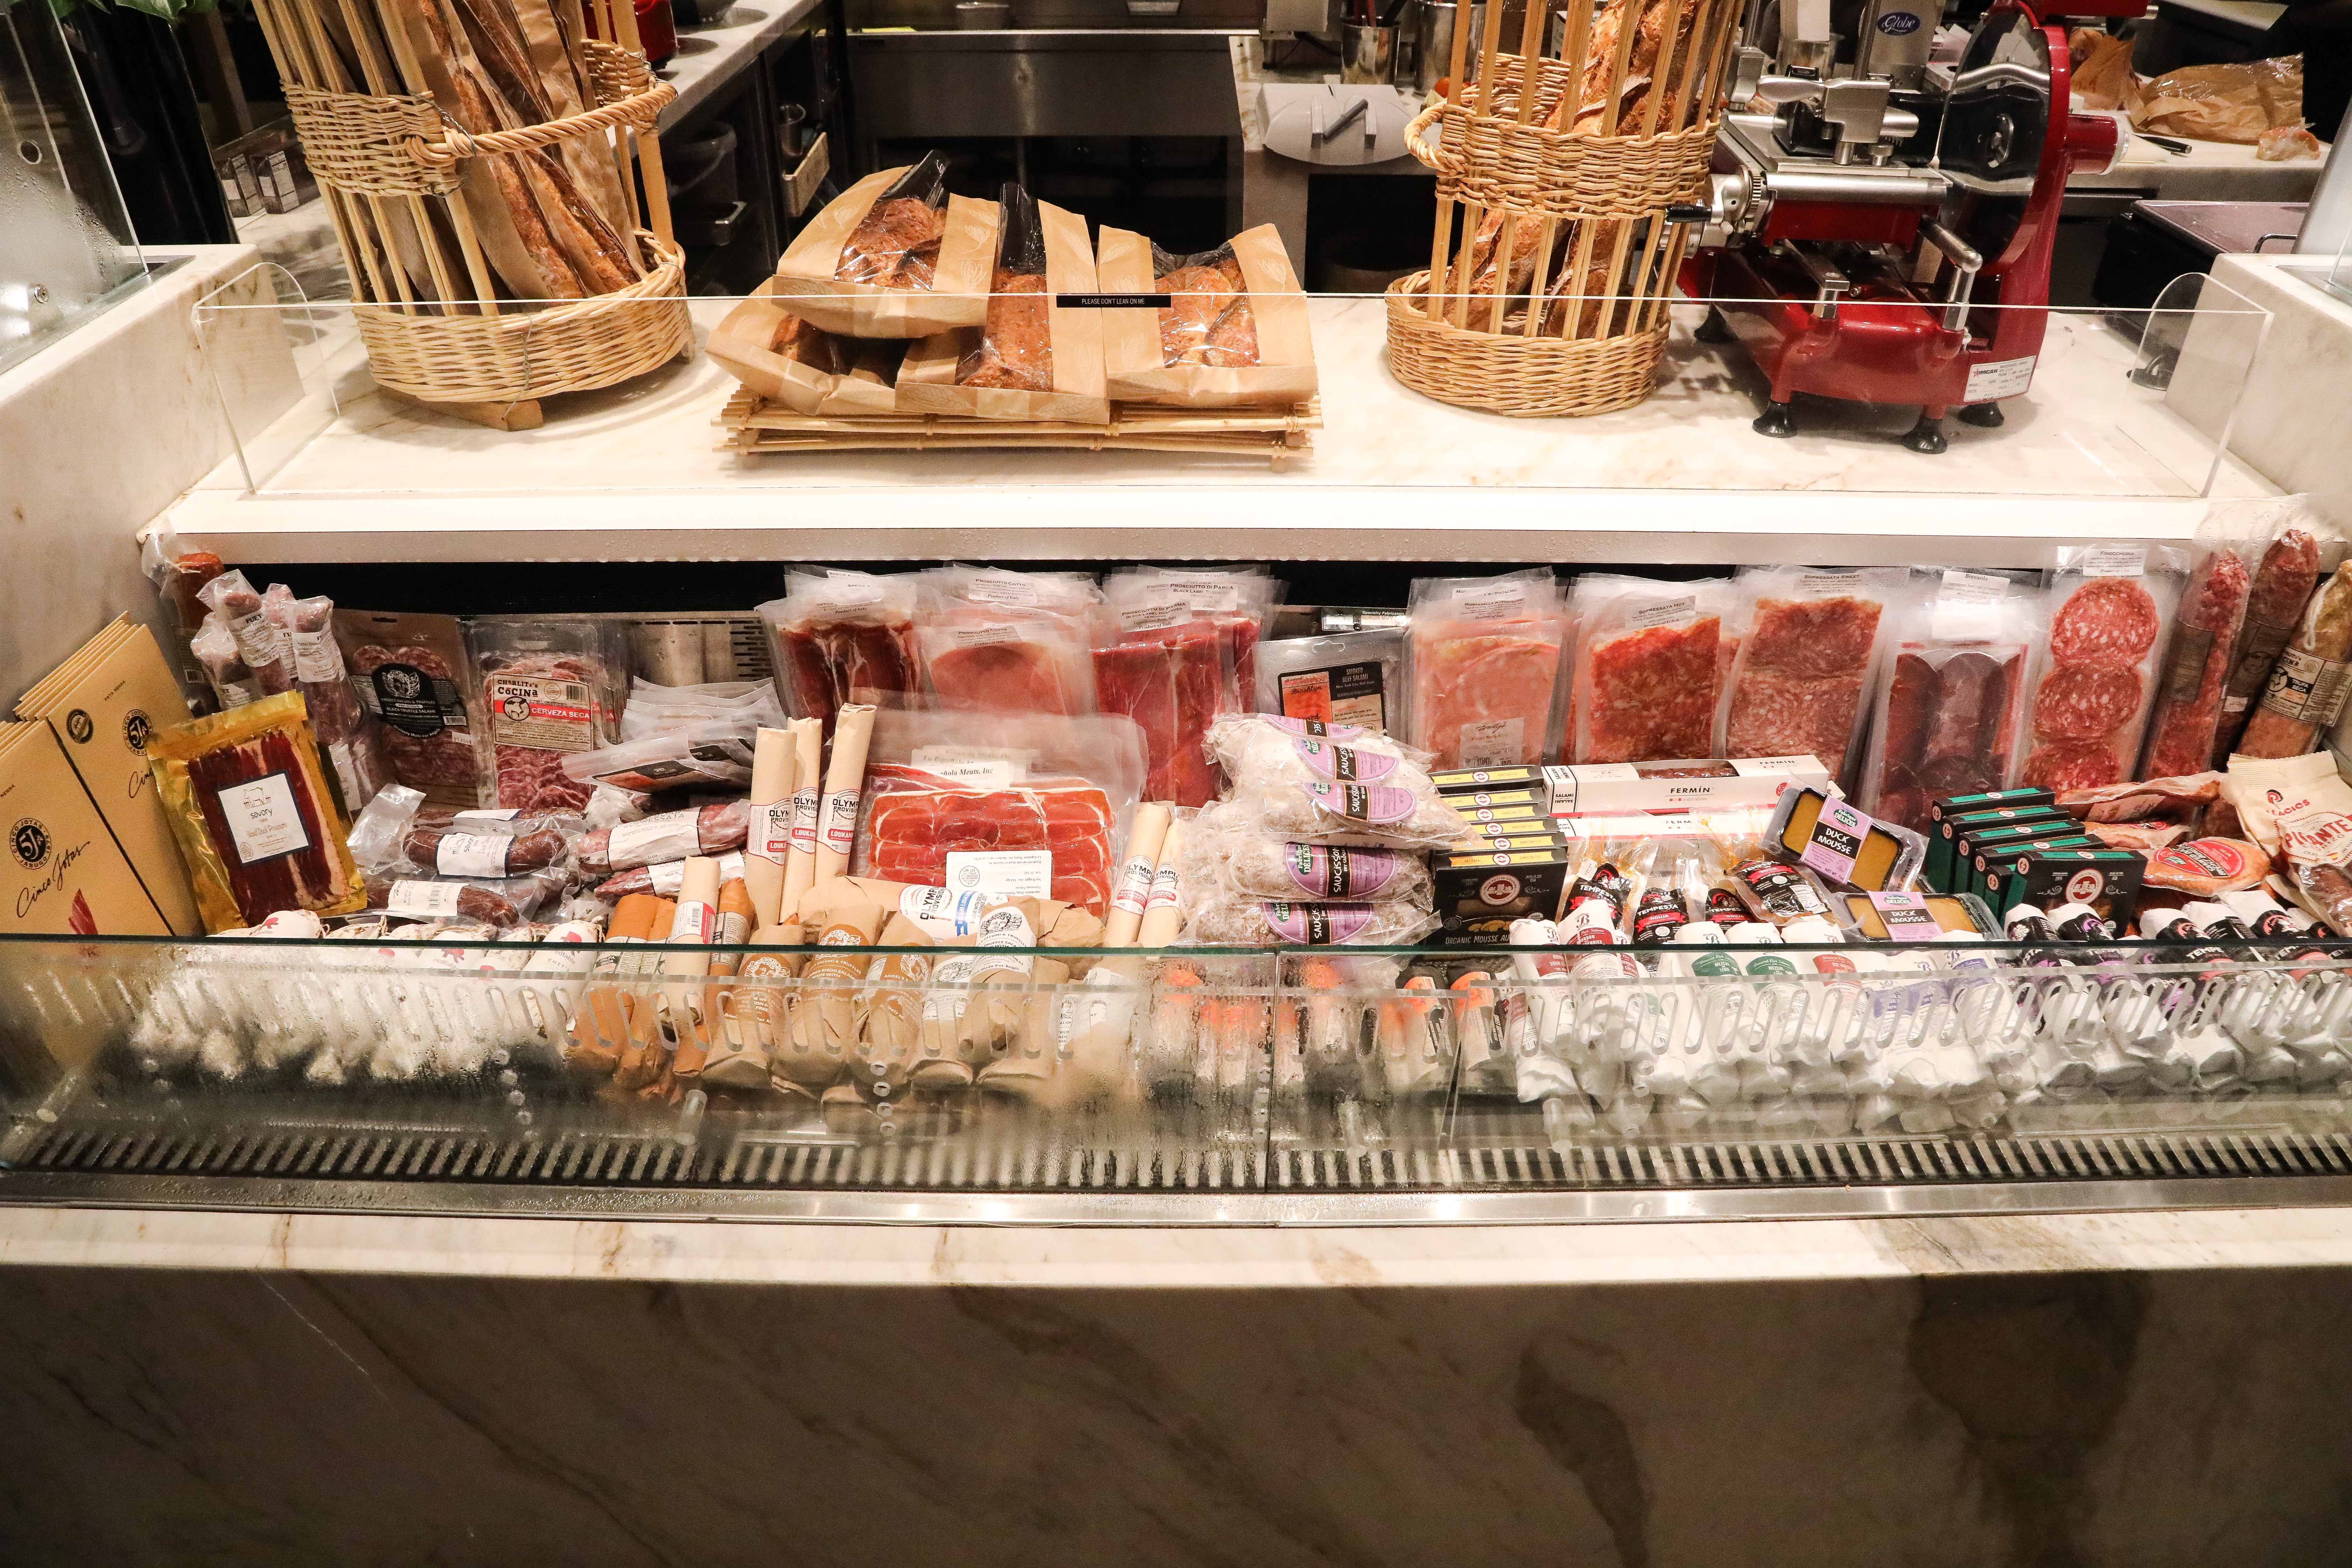 Premium charcuterie and cured meats at Wally's